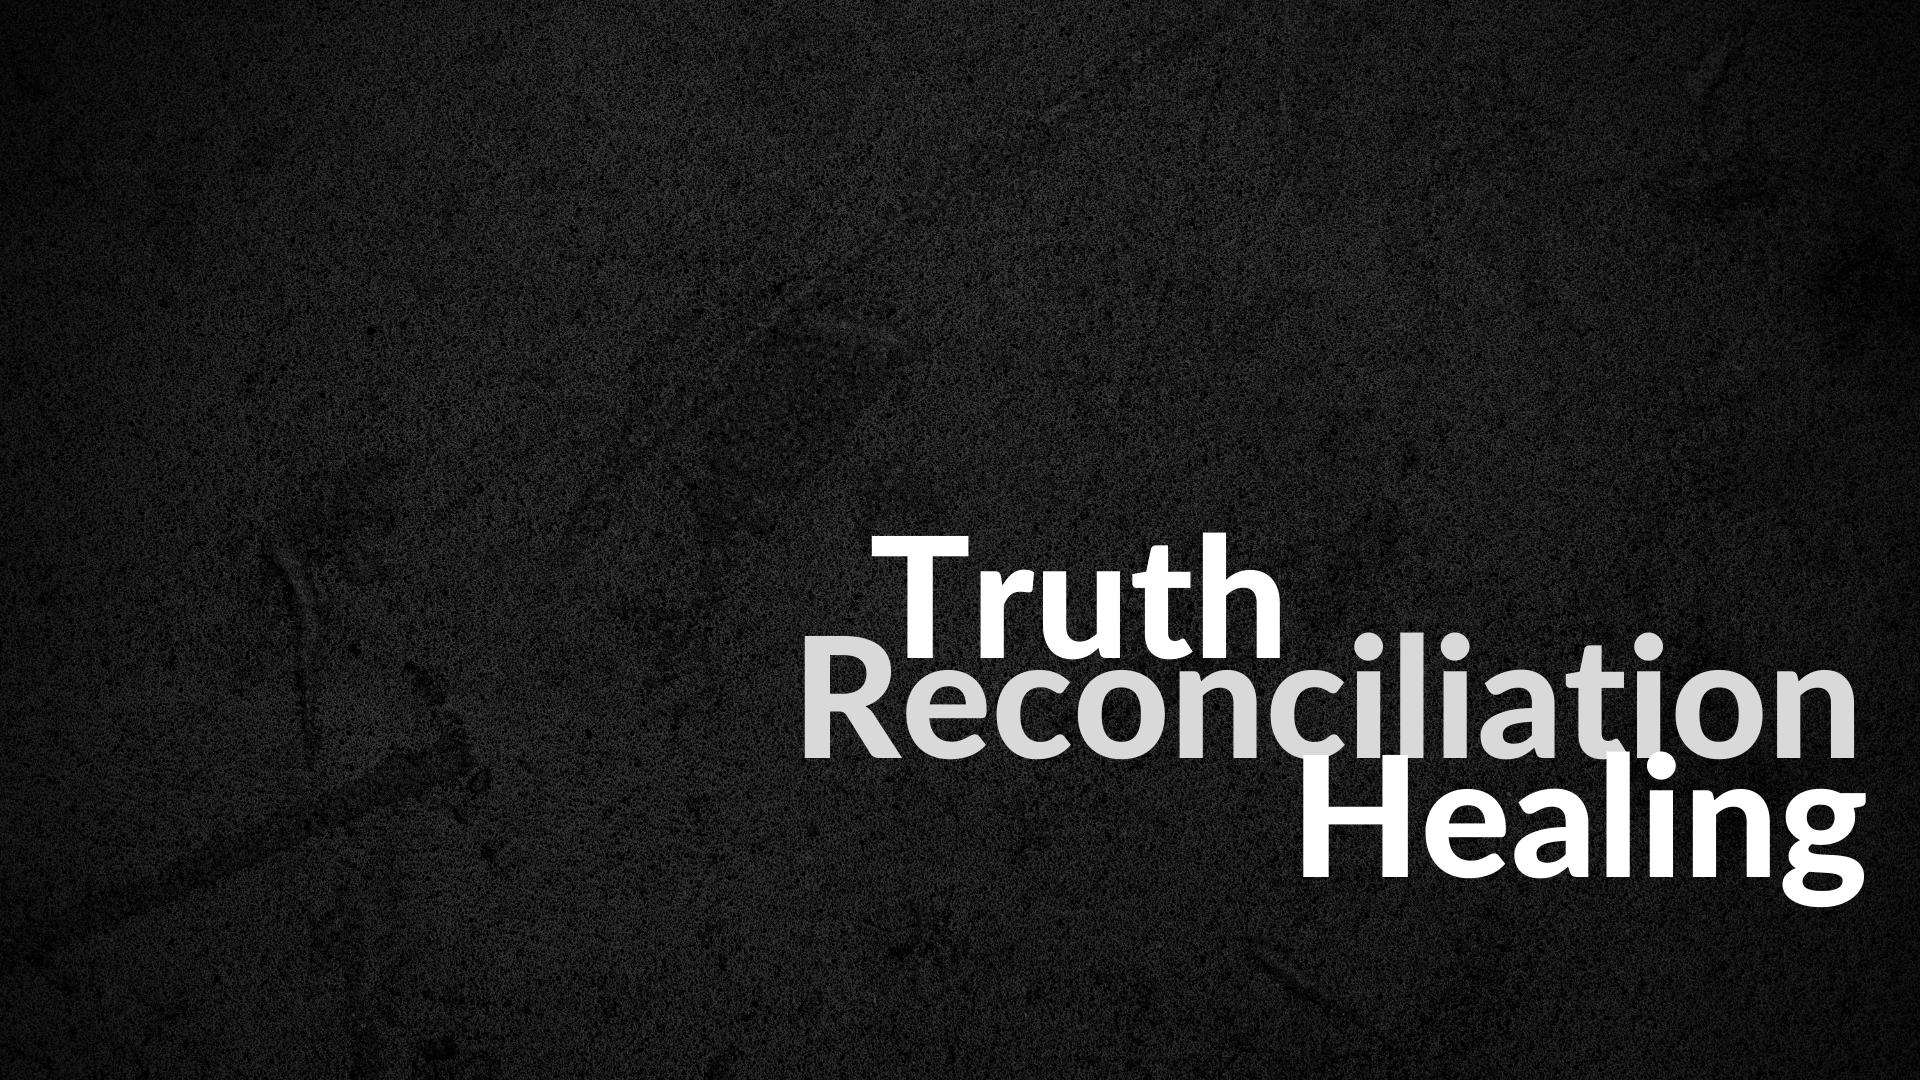 Truth, Reconciliation & Healing